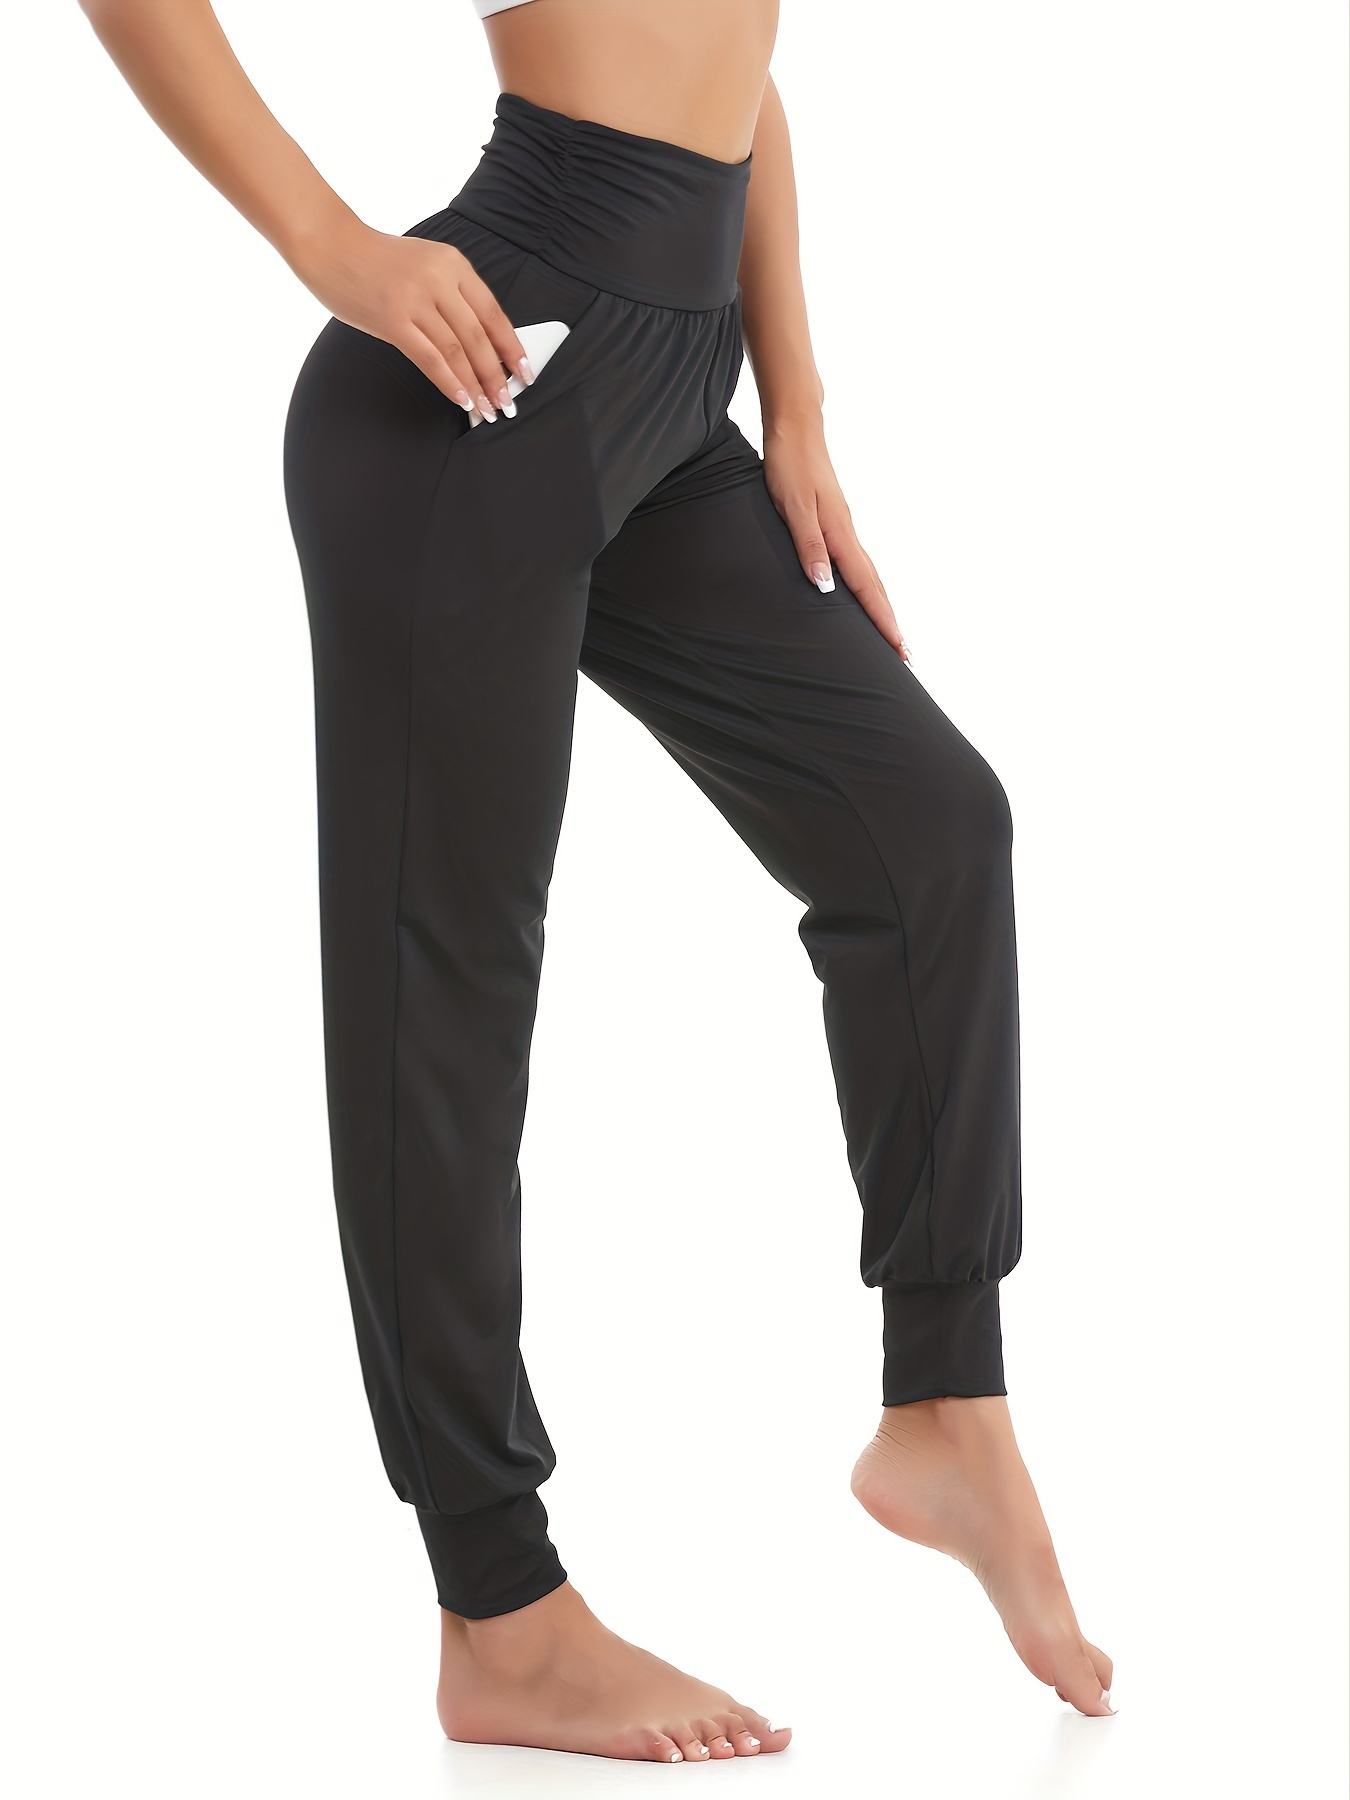 Women's Casual Pants: Loose Coral Pockets Capri Pants with Drawstring Tie  Side & Hollow Out for Yoga & Sports - Perfect for Any Occasion!